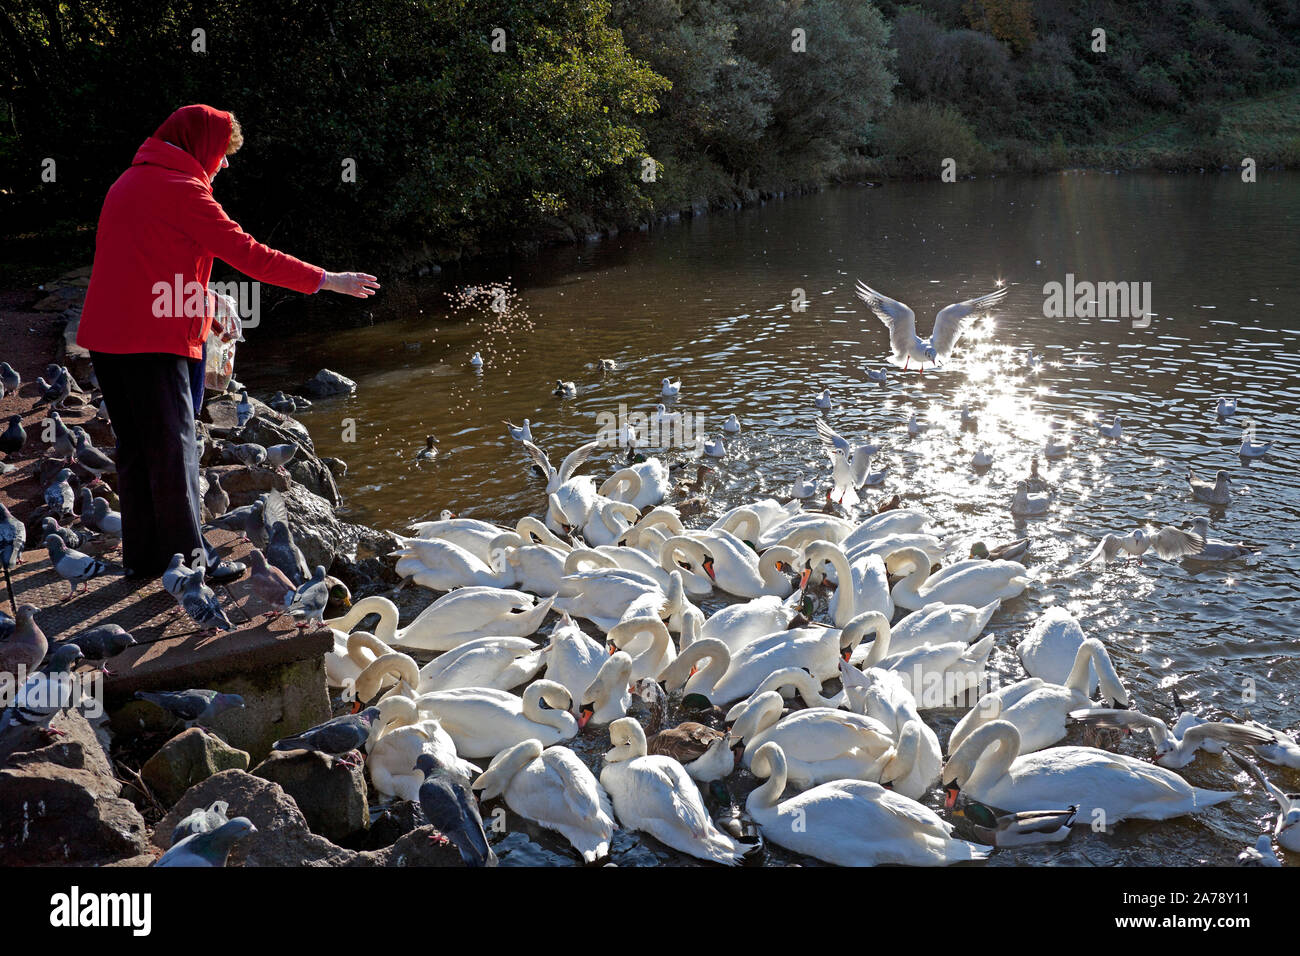 St Margarets Loch, Edinburgh, Scotland. 31st October 2019. UK weather, in this cold weather of 6 degrees the Queen's Mute swans and others appreciate supplementary beneficial feeding of grain and vegetables from a kind lady pictured in a red jacket and head scarf in Holyrood Park. Park Rangers warn against feeding just white bread as it is claimed to have no nutritional value and it can cause arthritis and birth defects. Credit: Arch White/Alamy Live News. Stock Photo